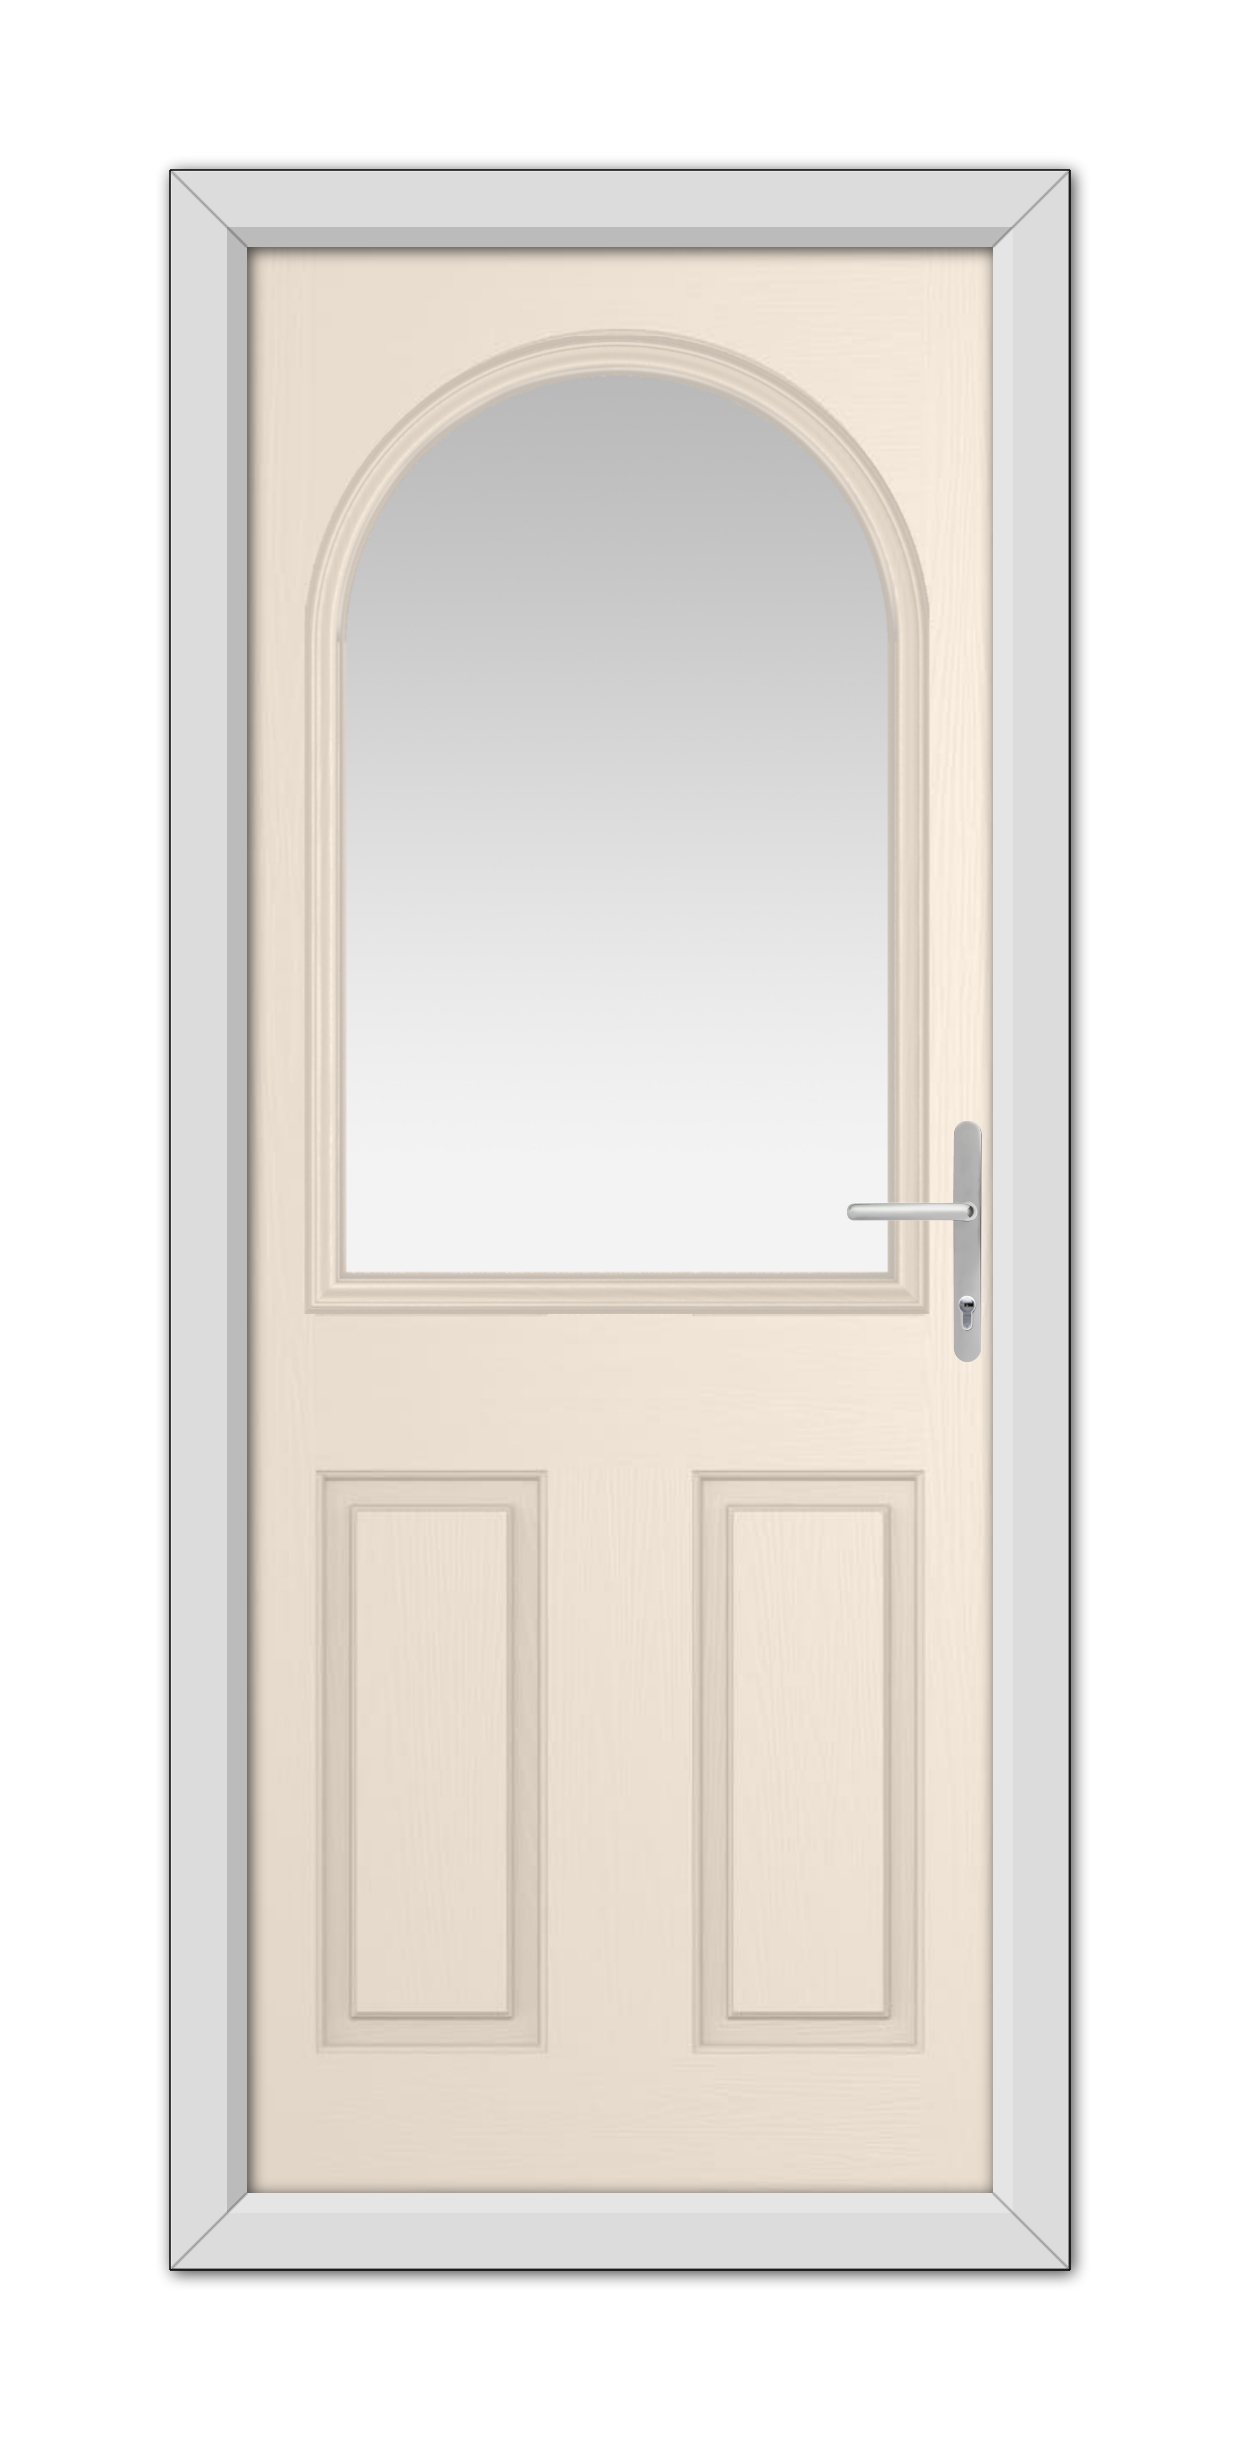 A Cream Grafton Composite Door 48mm Timber Core with an arched window at the top, a modern handle on the right, and a metal frame around it.